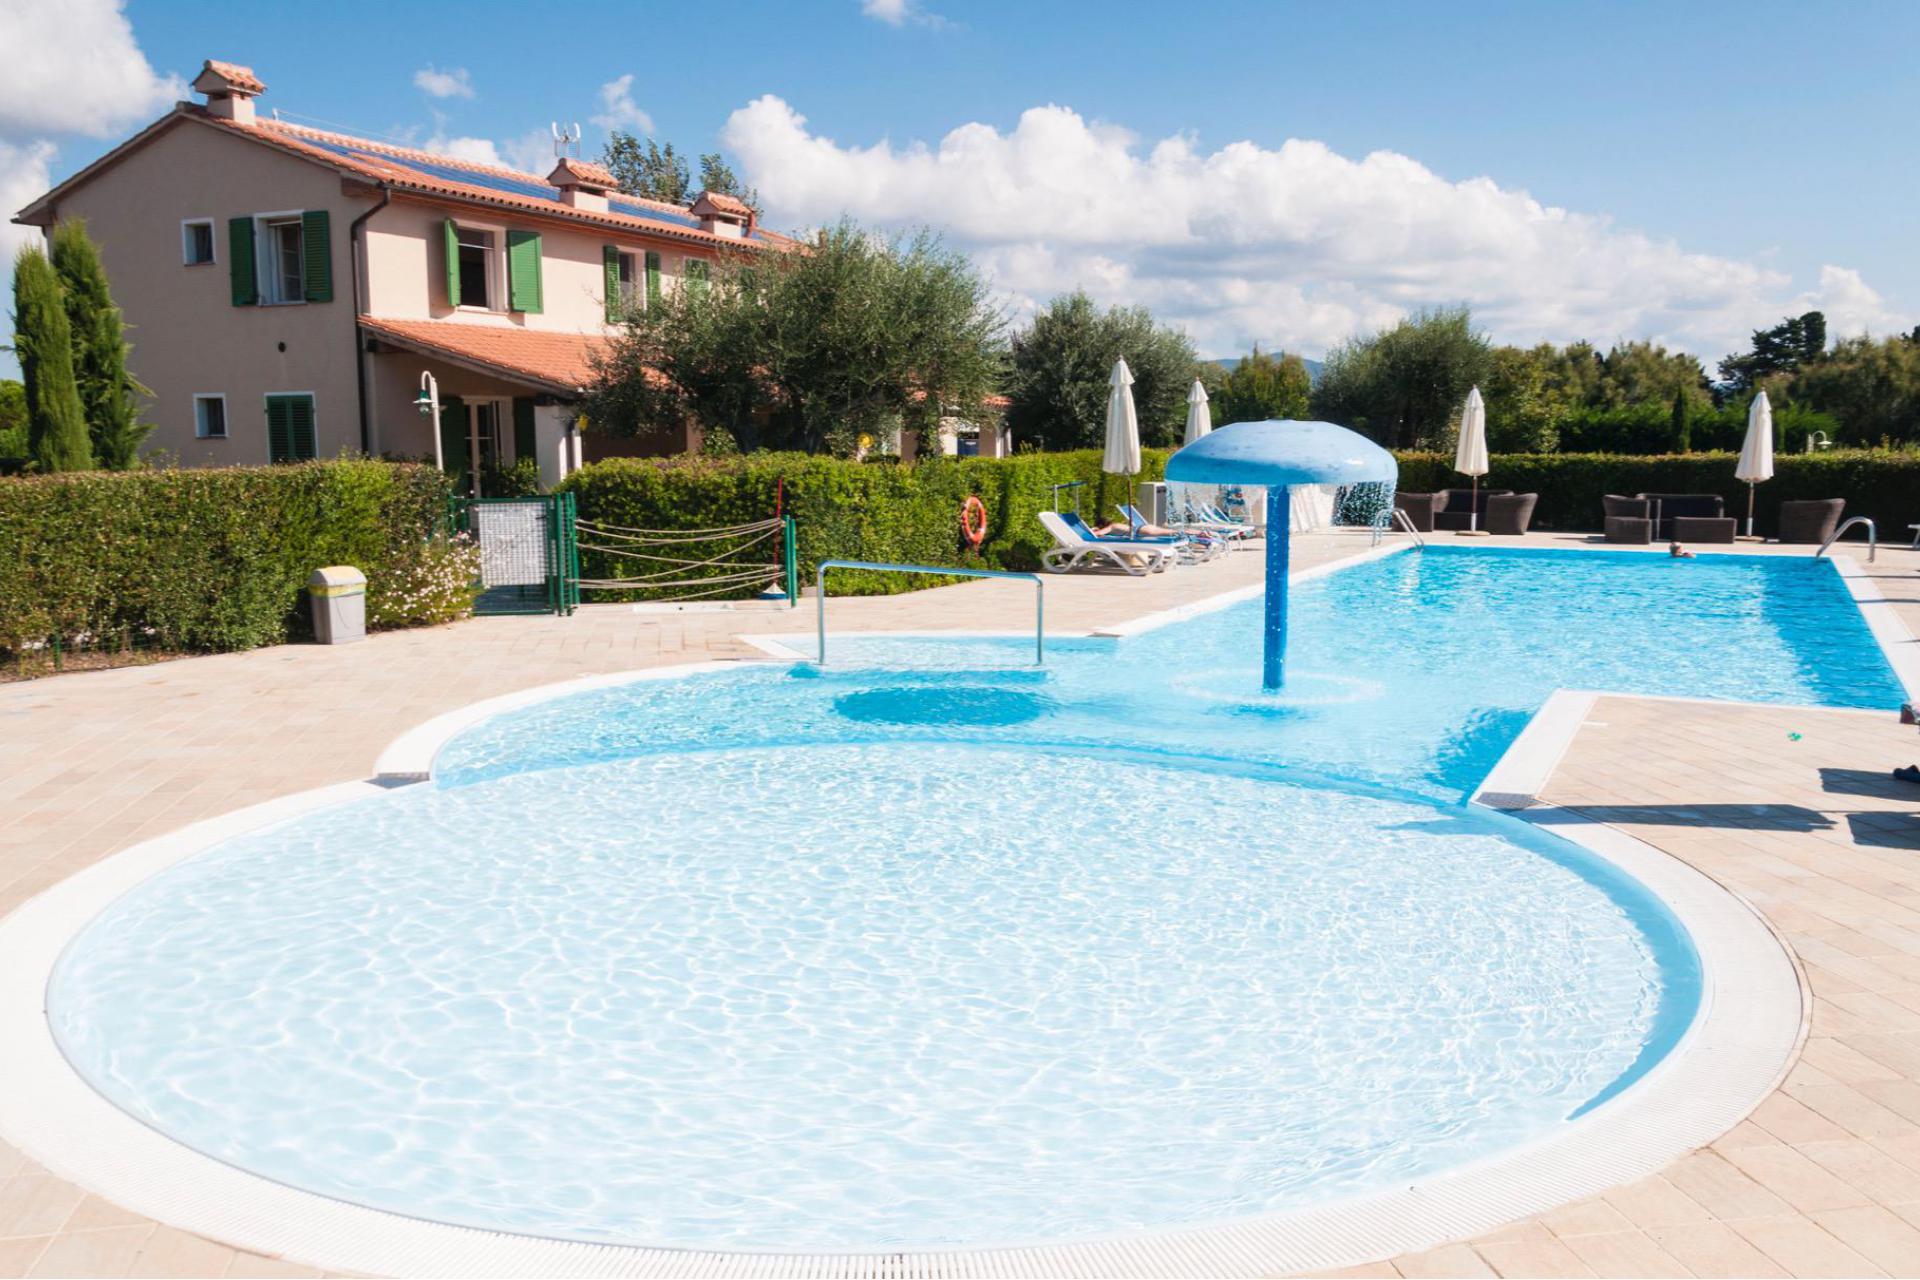 Agriturismo within walking distance of the sea